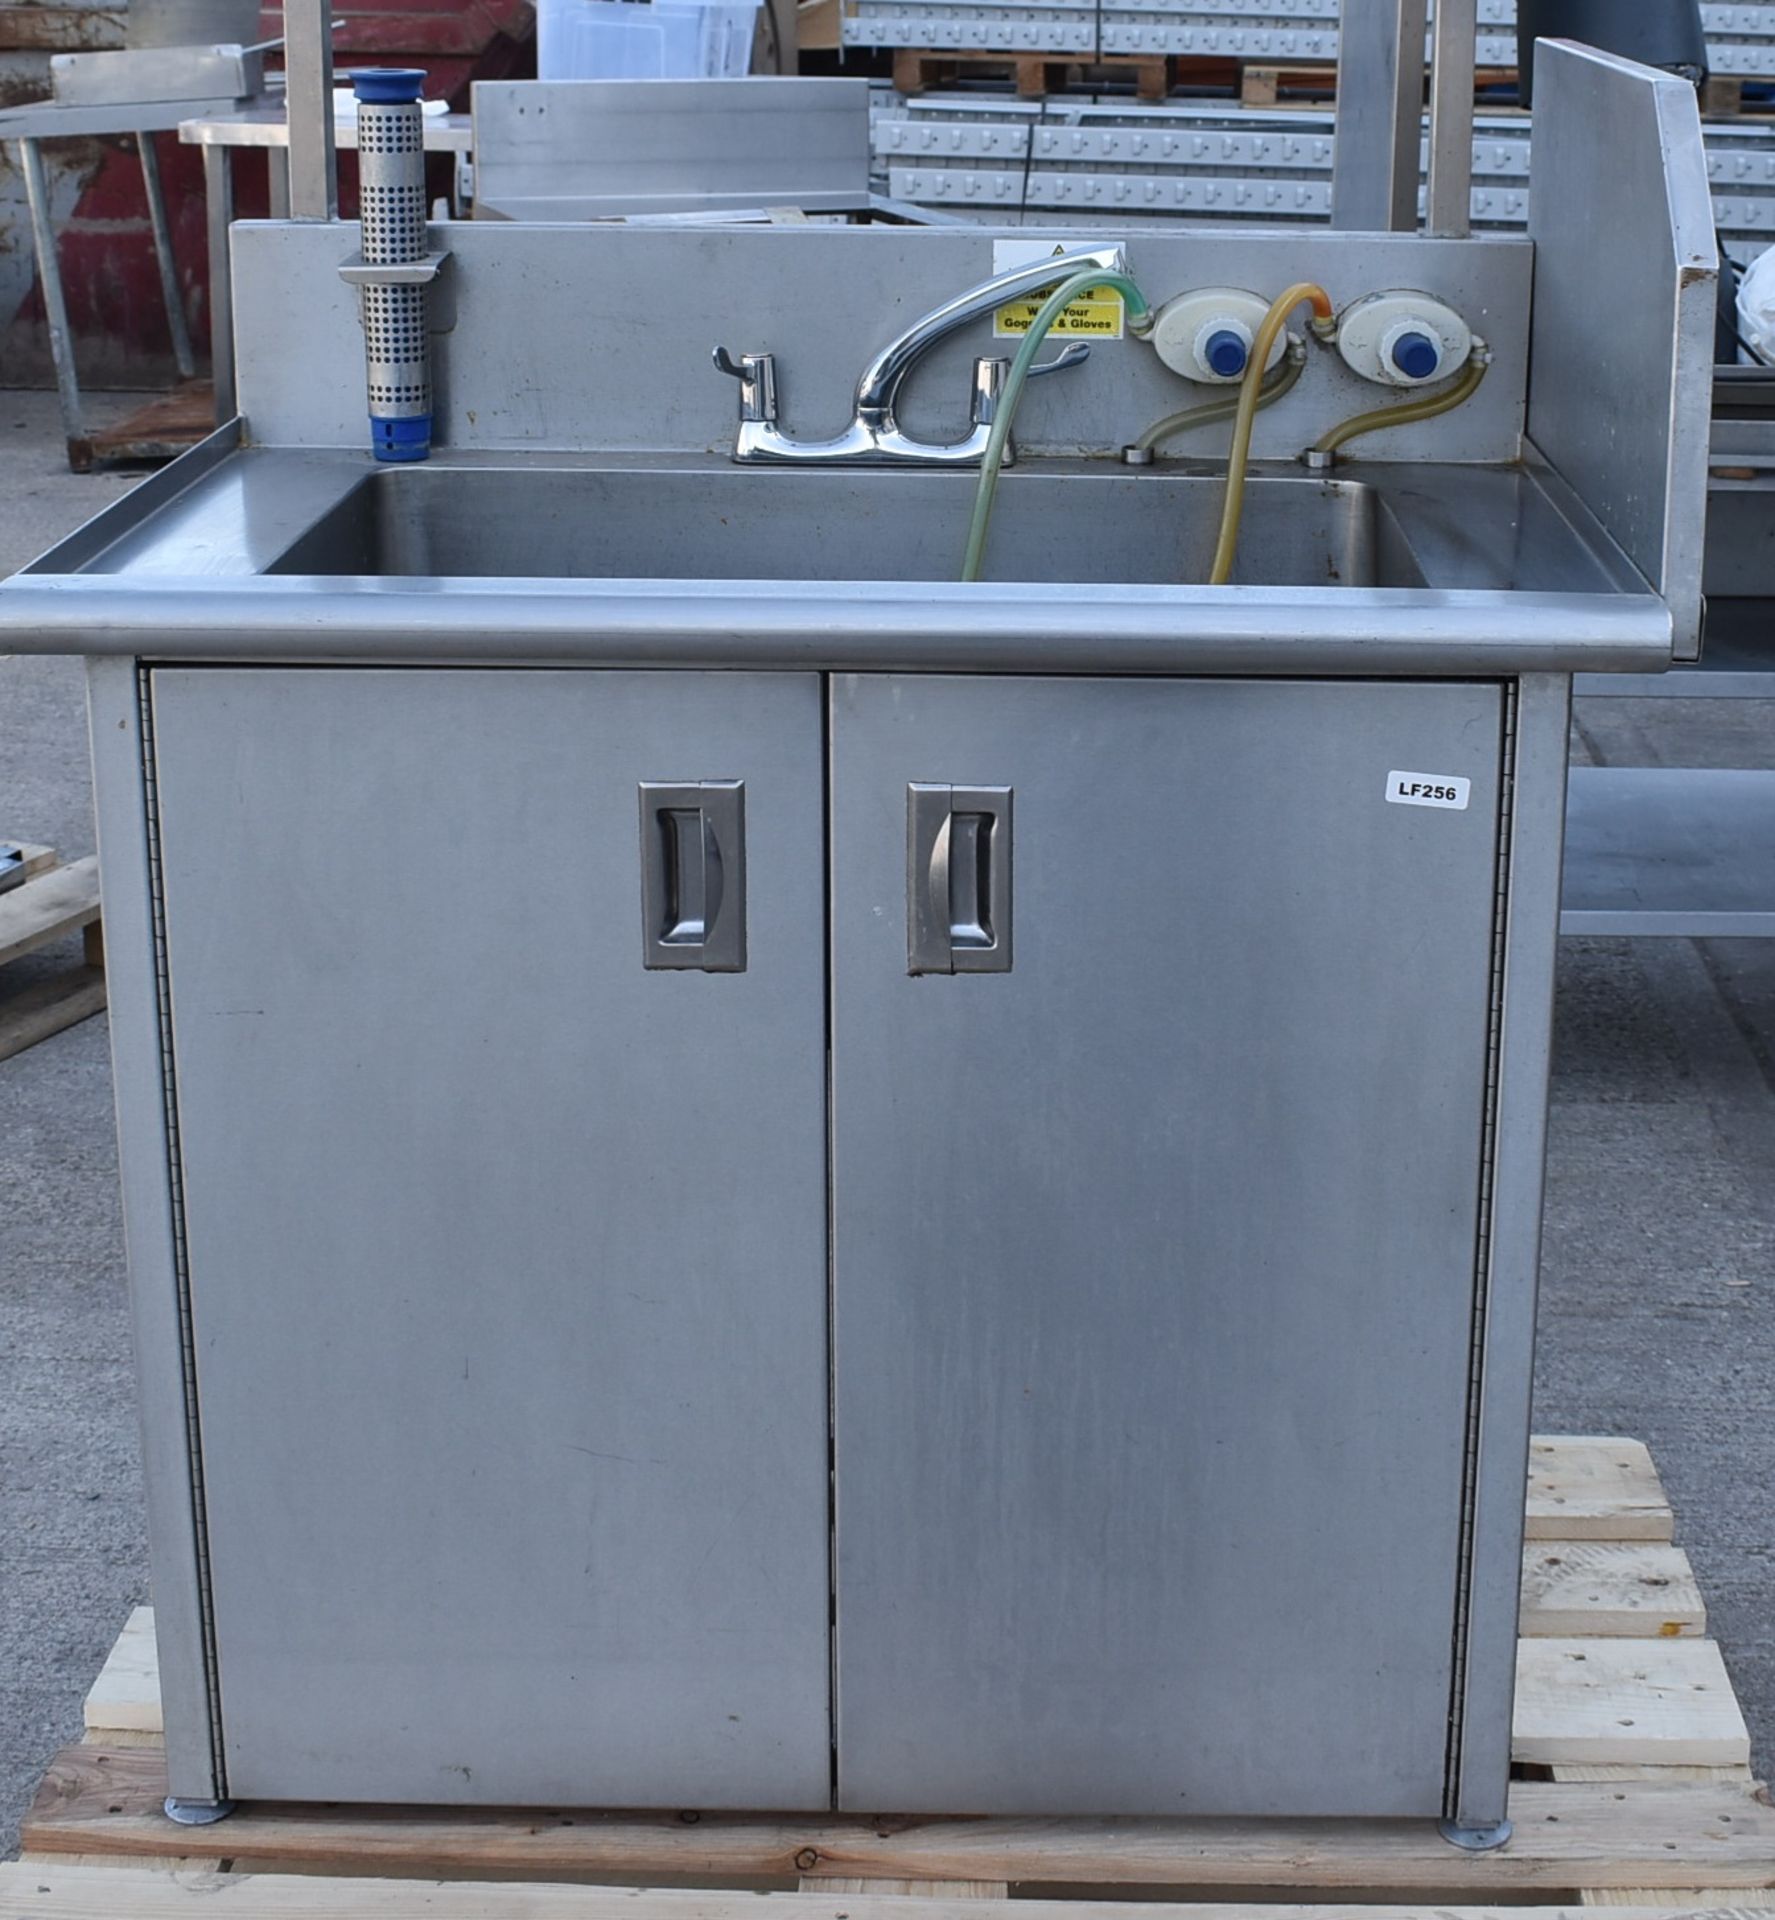 1 x Commercial Wash Unit With Large Rectangular Basin Over a Storage Cupboard, Mixer Taps, Splash - Image 2 of 11